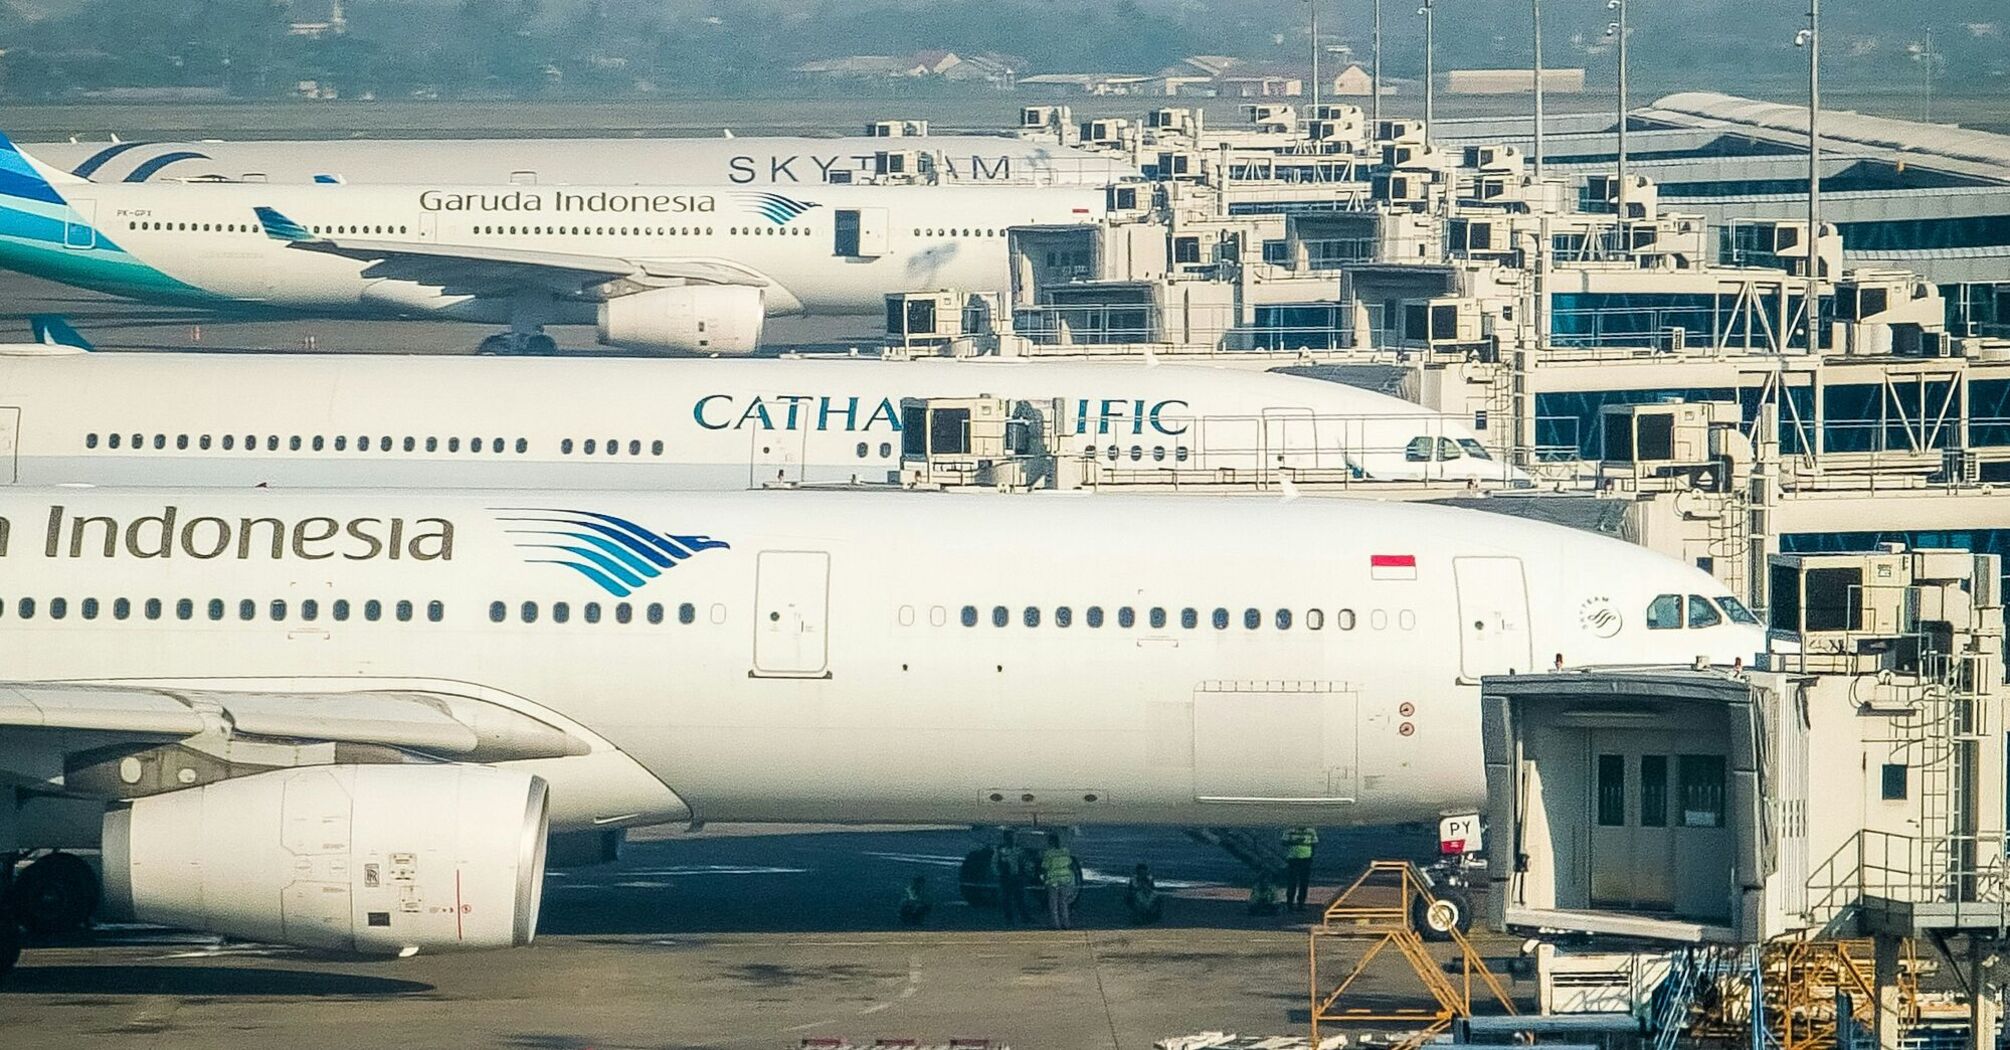 Commercial airplanes from various airlines parked at airport gates with jet bridges and ground service equipment visible